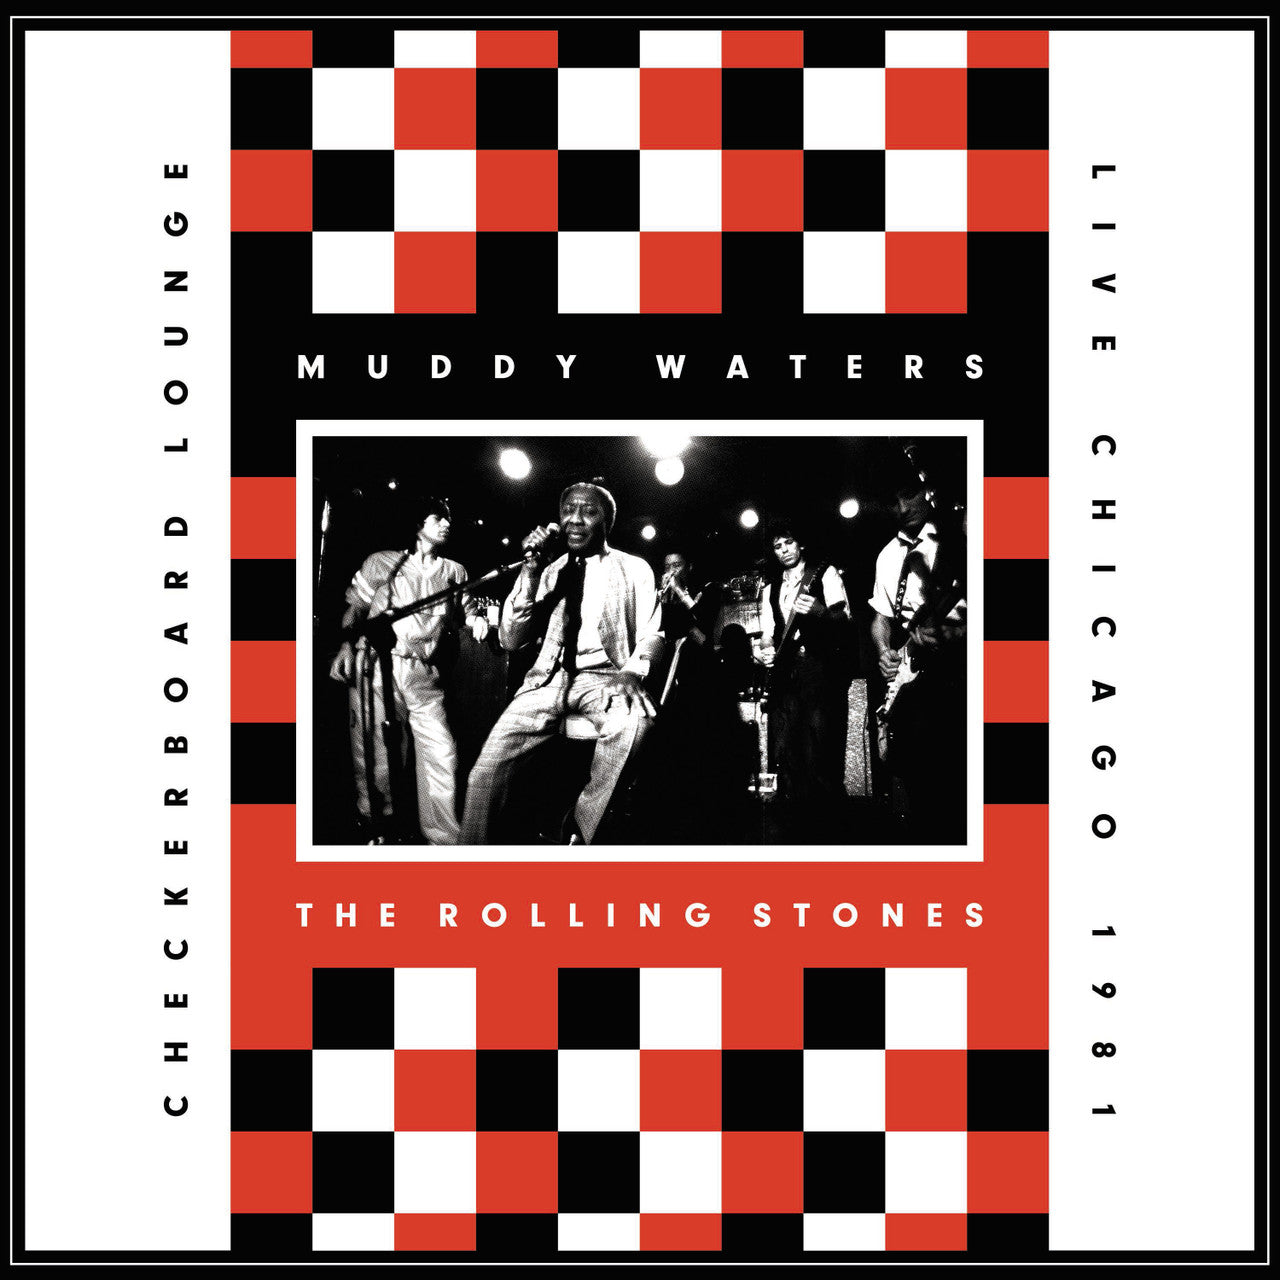 MUDDY WATERS & THE ROLLING STONES - CHECKERBOARD LOUNGE: LIVE CHICAGO 1981 - RED AND WHITE COLOR - 2-LP - VINYL LP